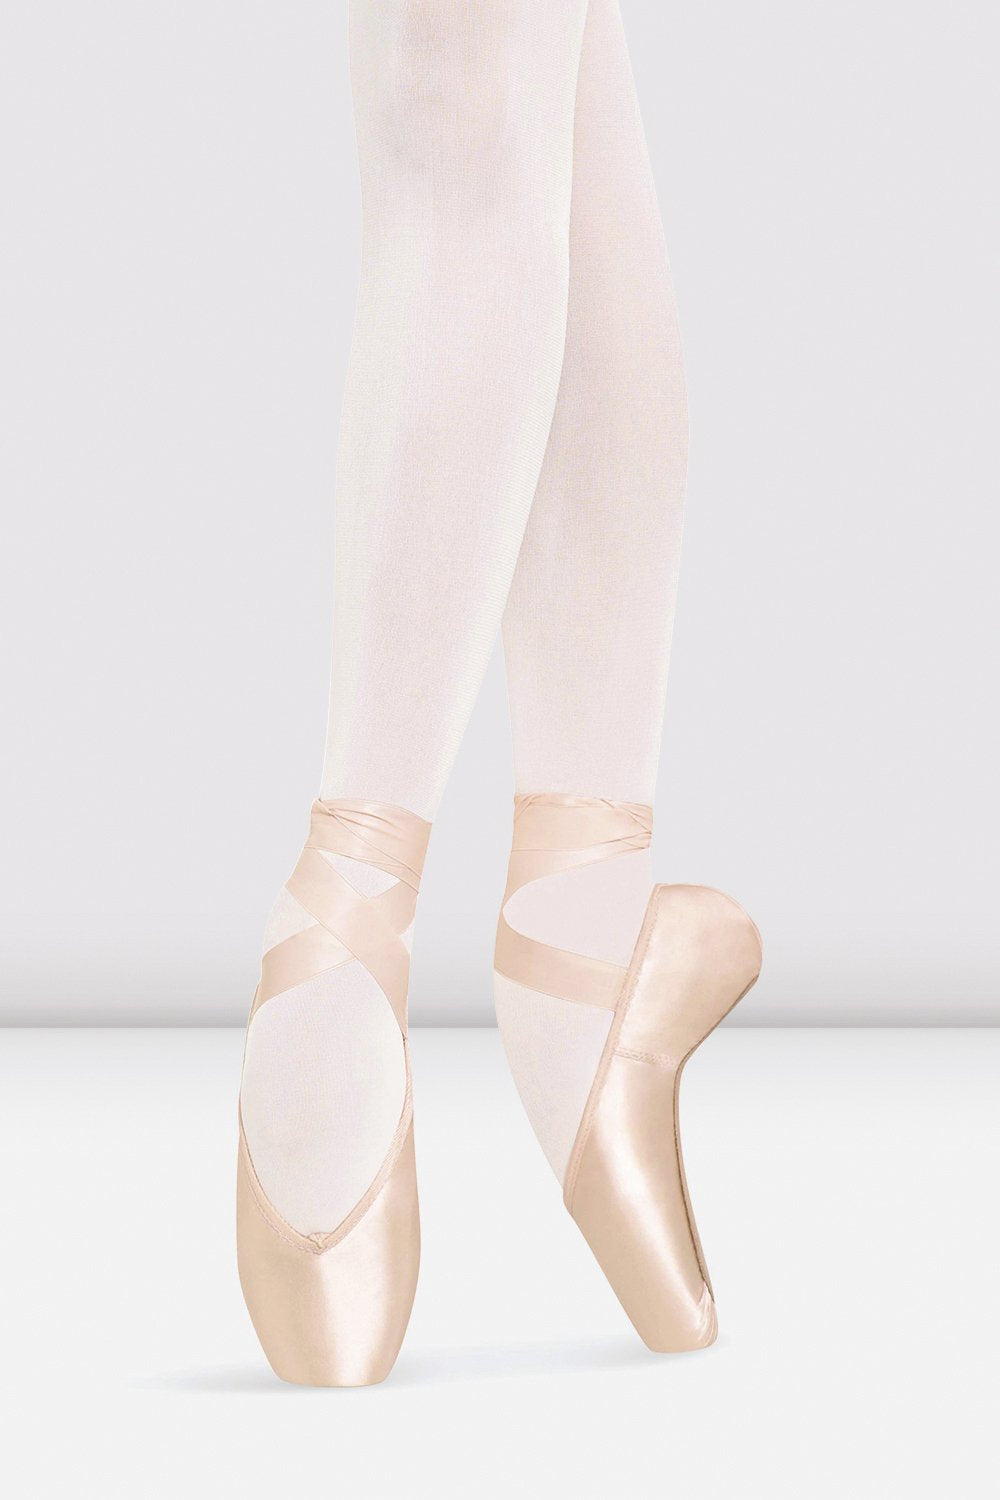 how expensive are pointe shoes 2